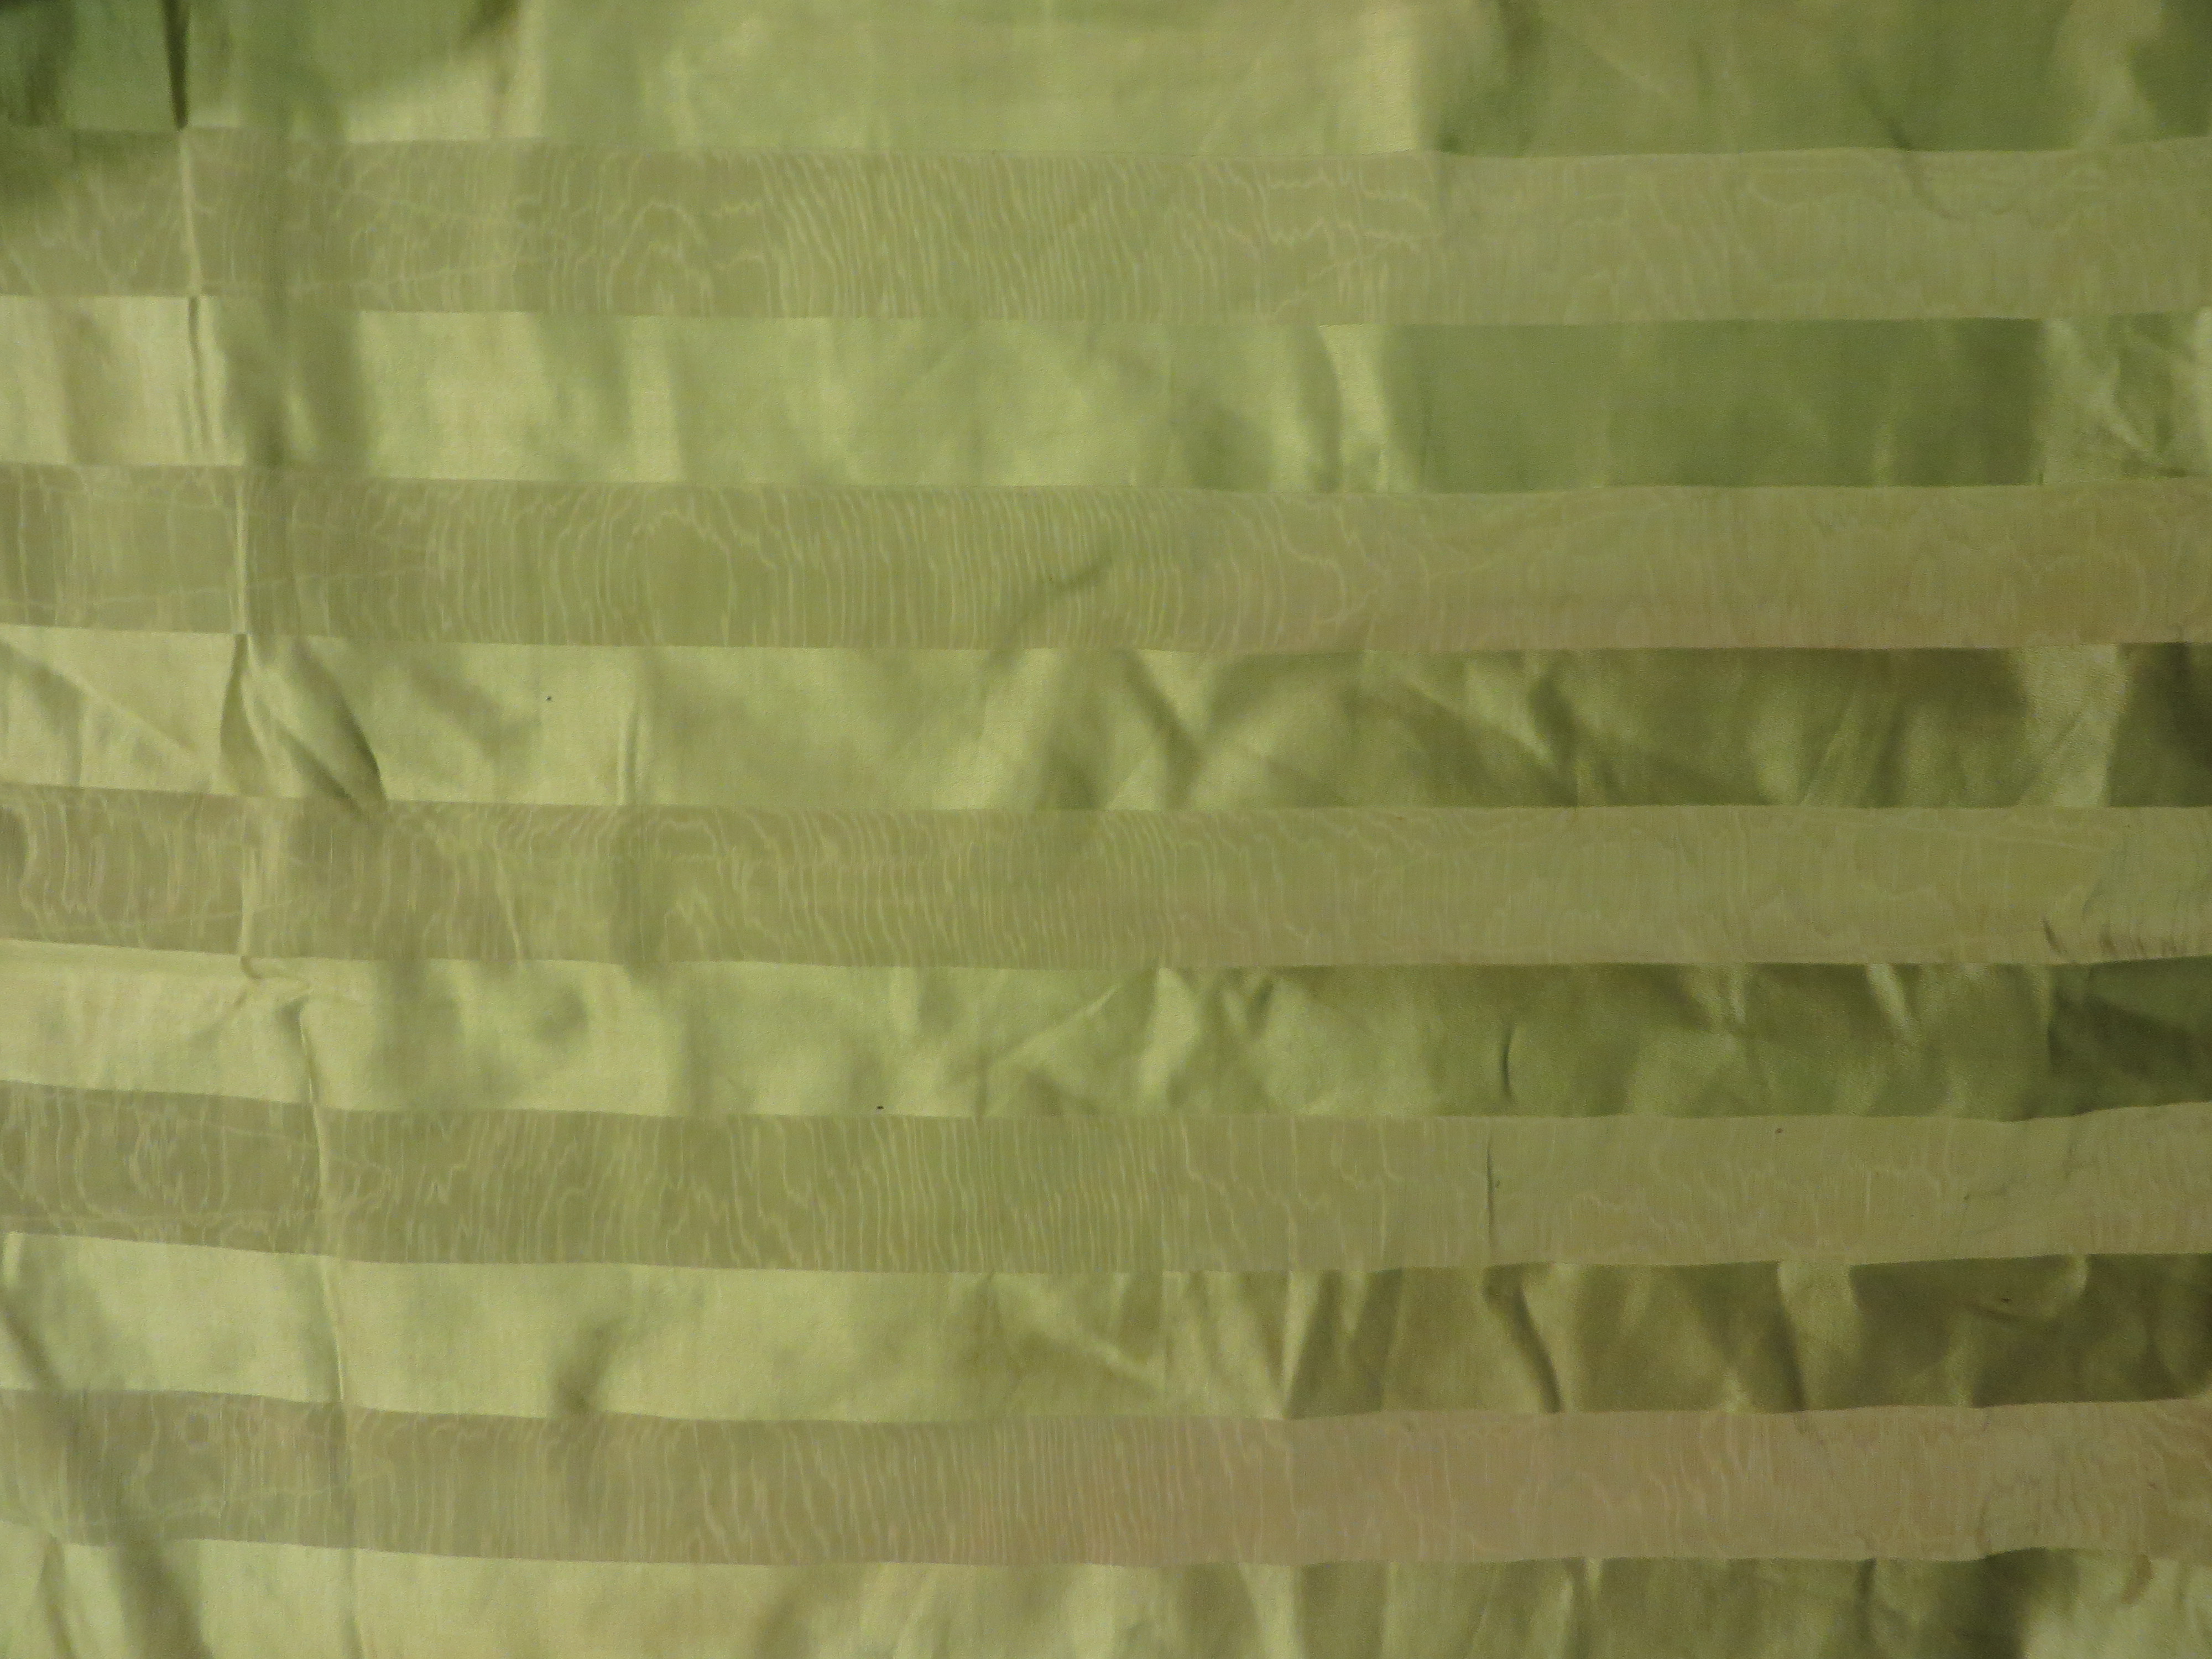 Three striped satin pale green Curtains with rusched detail and fringed edges, c1900. 50in W x 117in